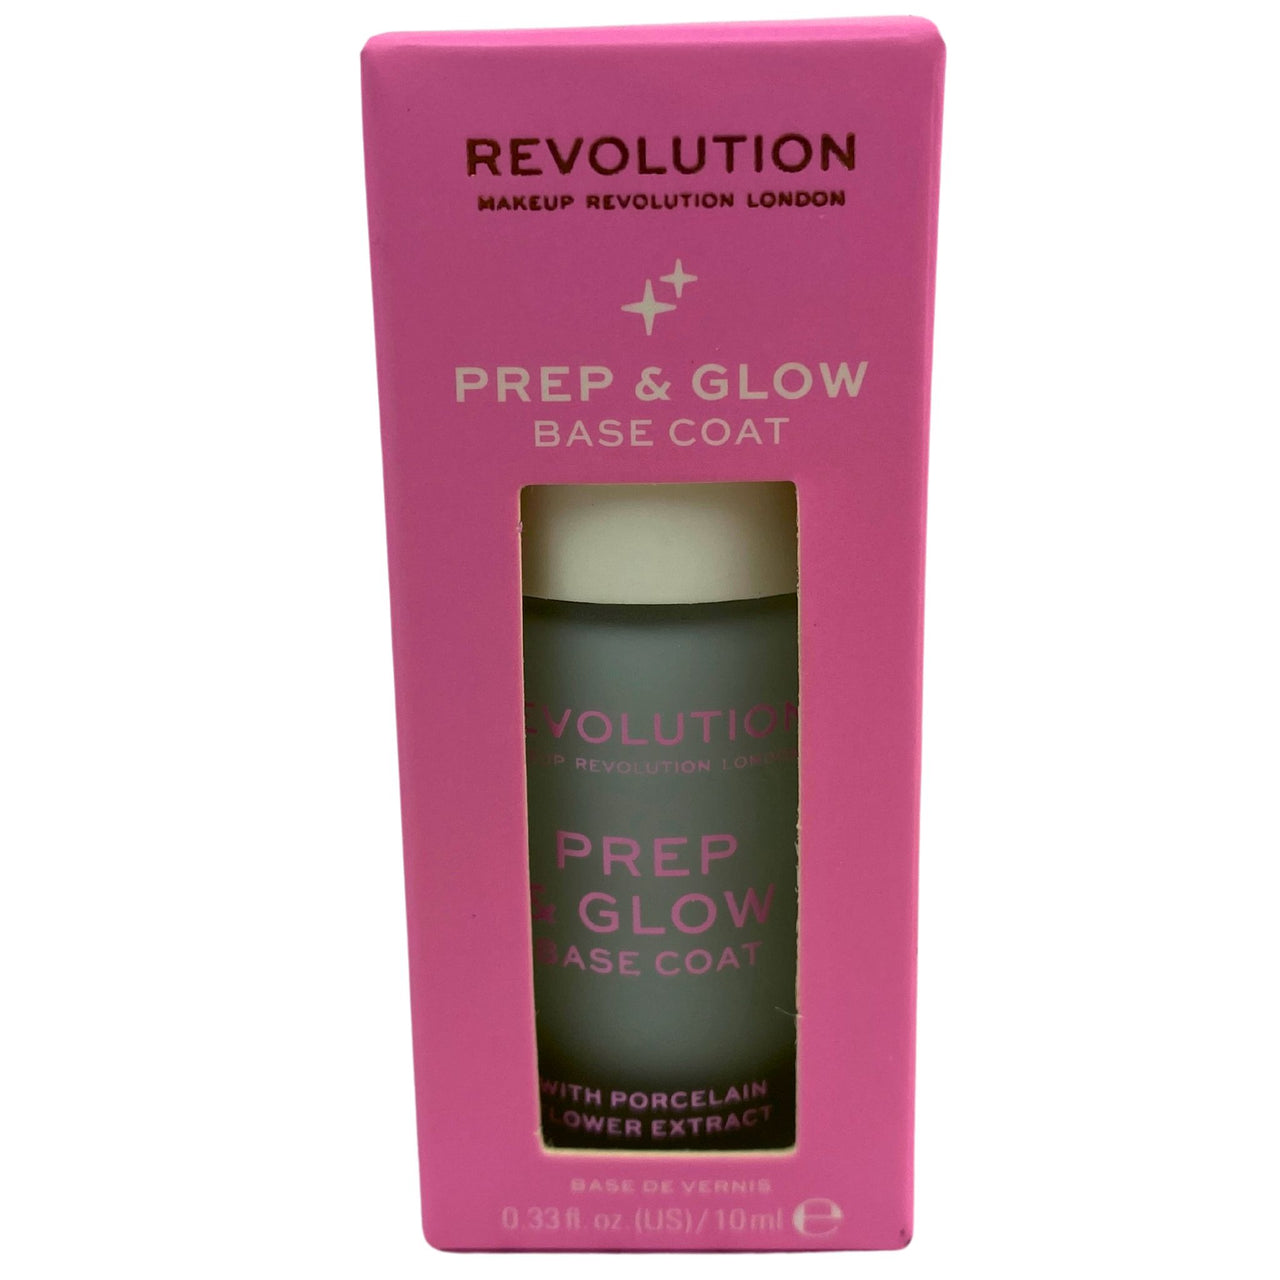 Revolution Prep & Glow Base Coat with Porcelain Flower Extract 